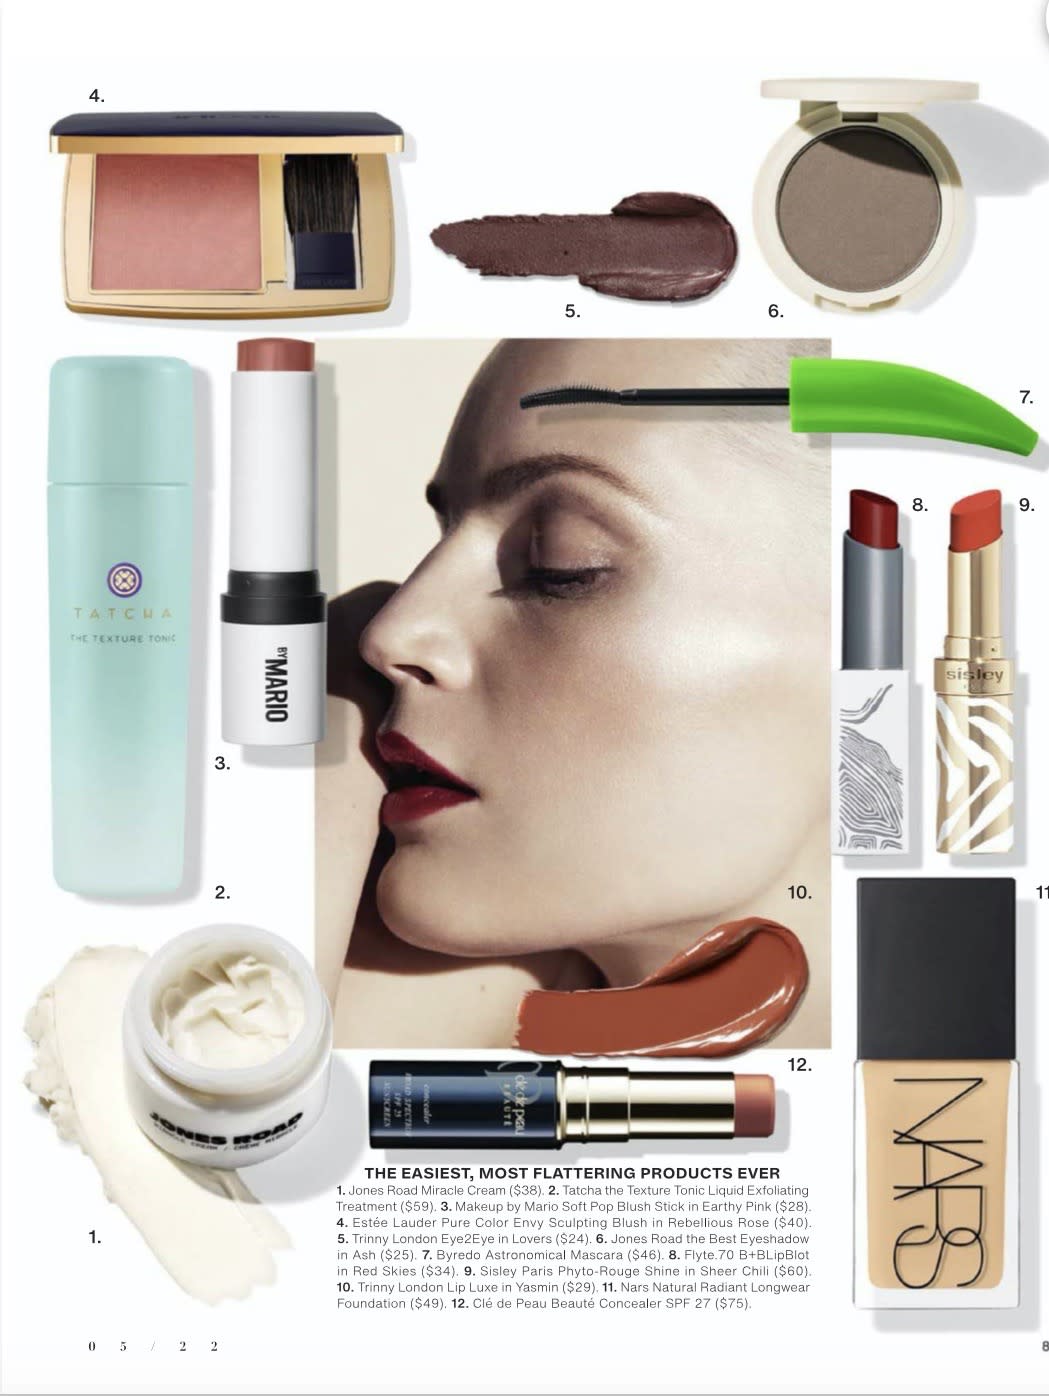 Image side profile of a woman's face surrounded by beauty products on a white background